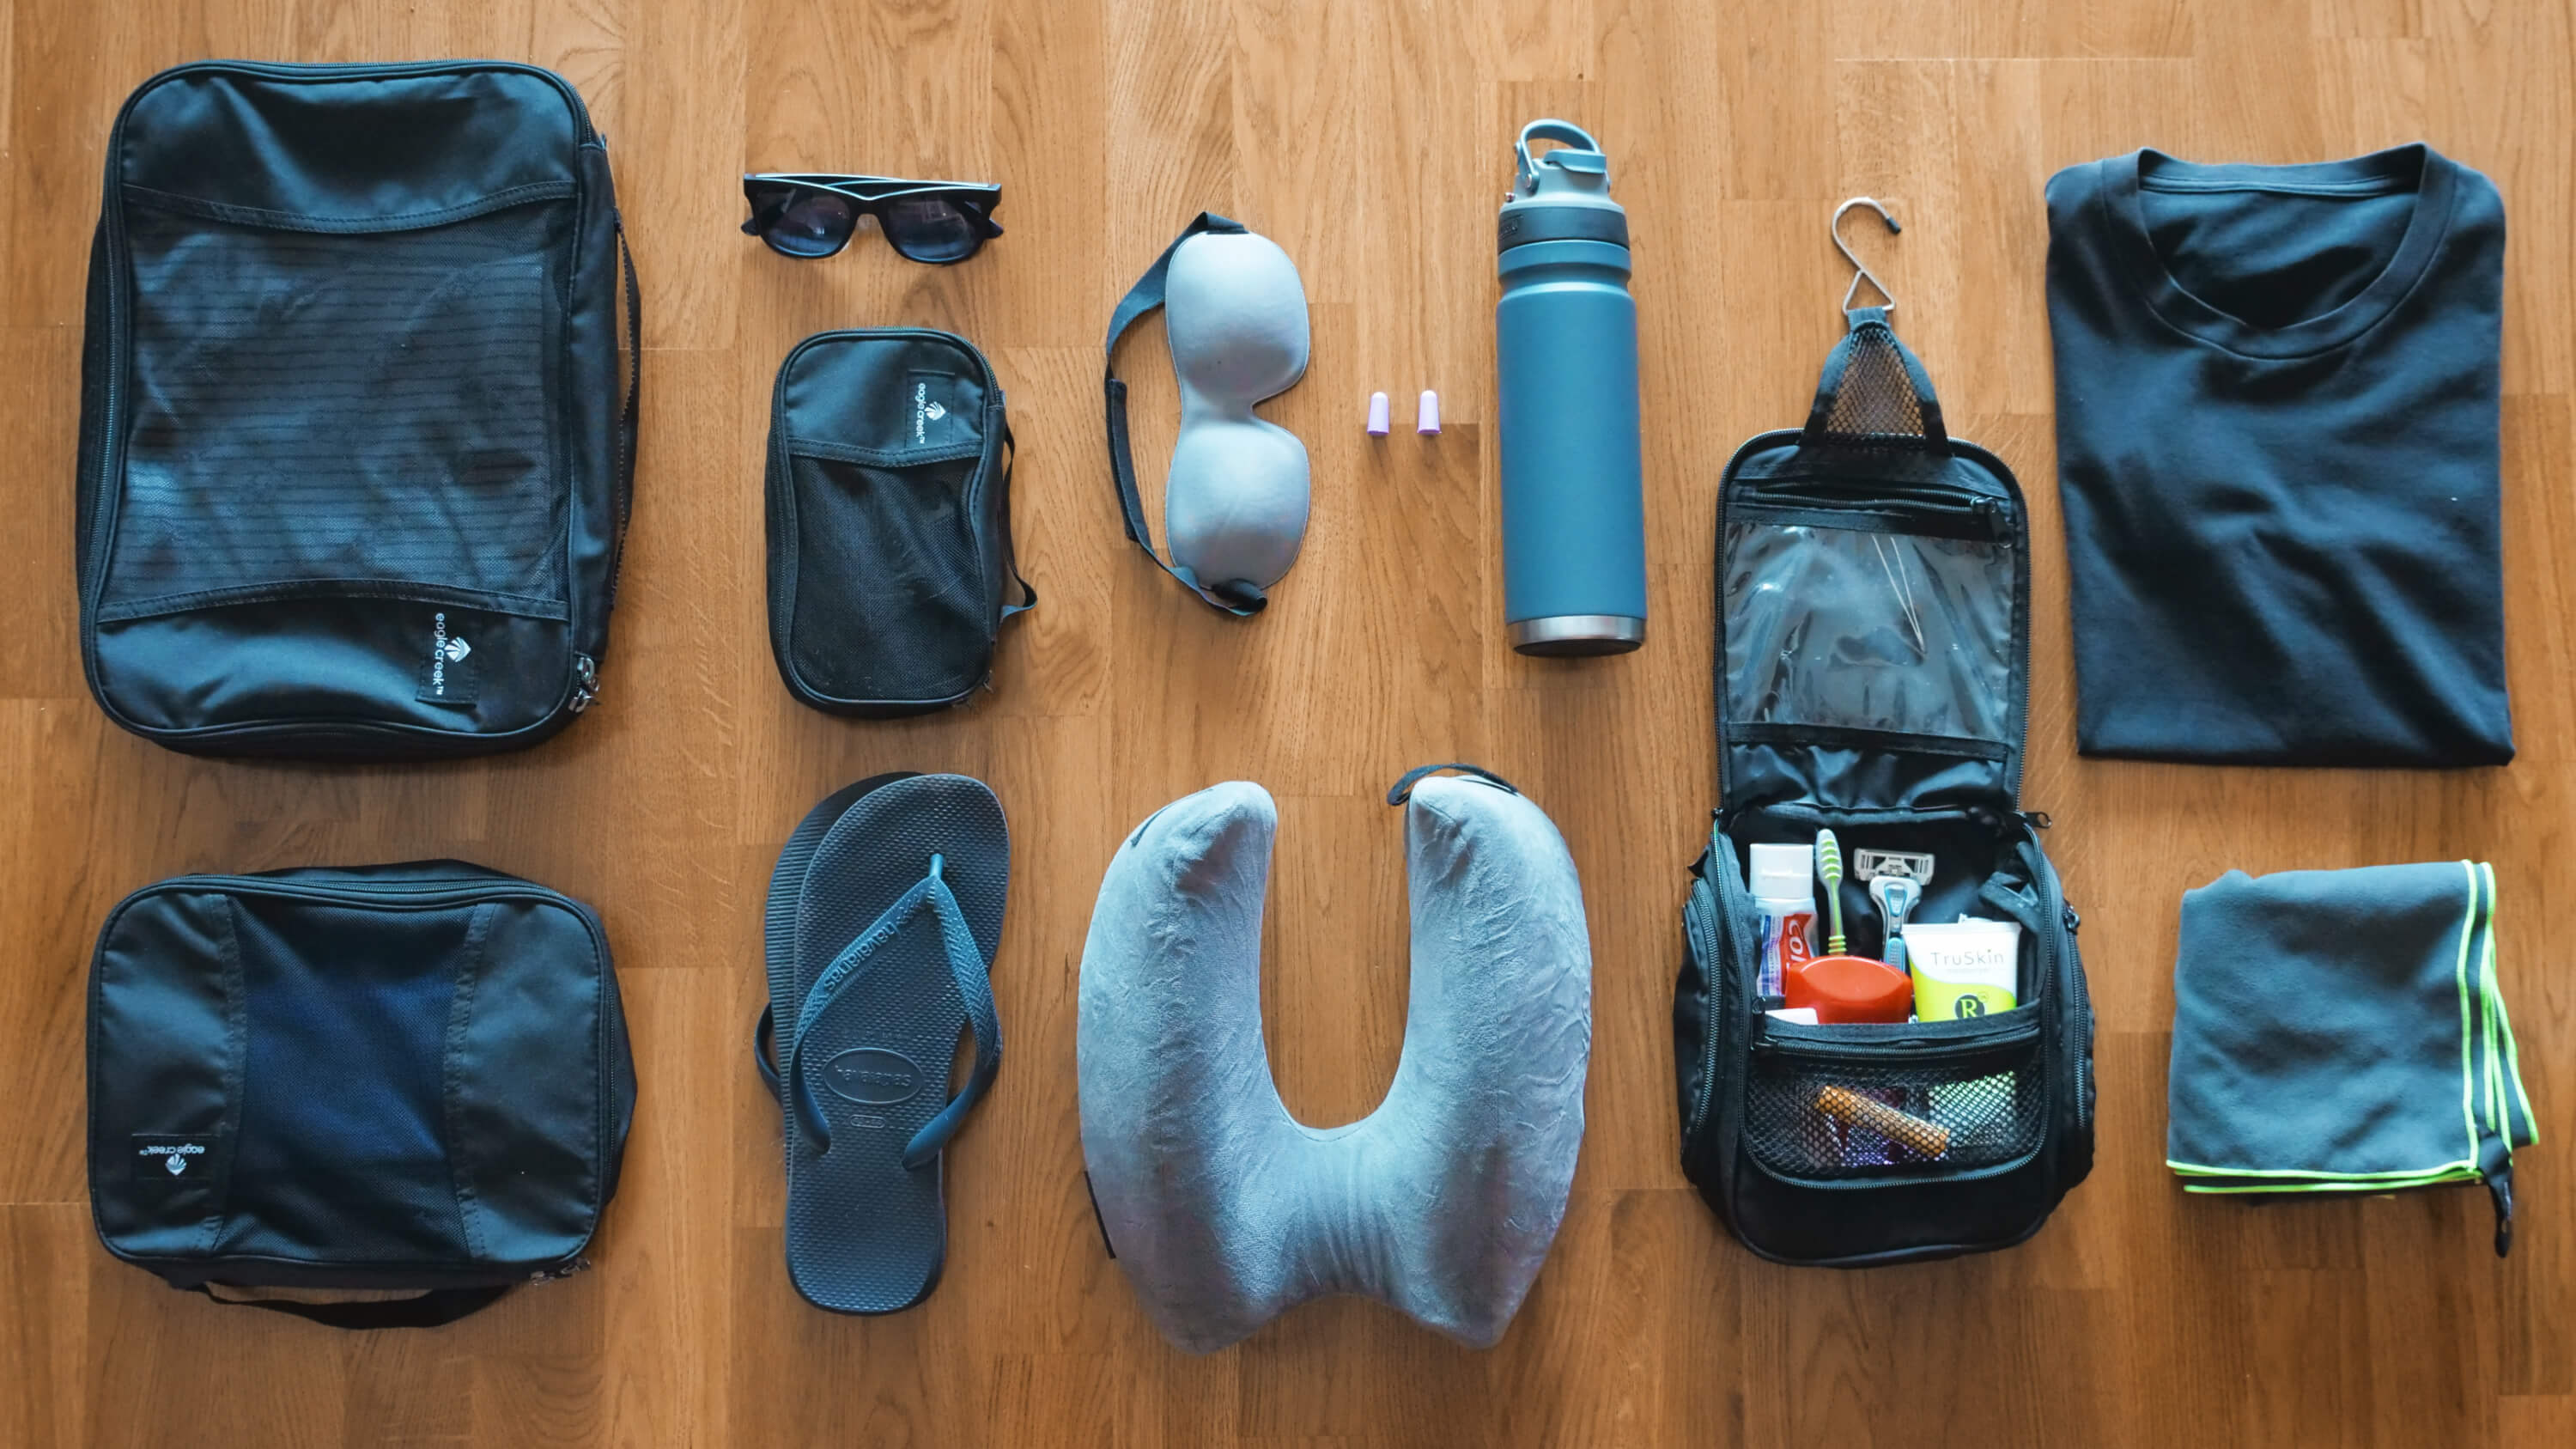 5 Must-Have Travel Gadgets to Buy Before Your Next Vacation